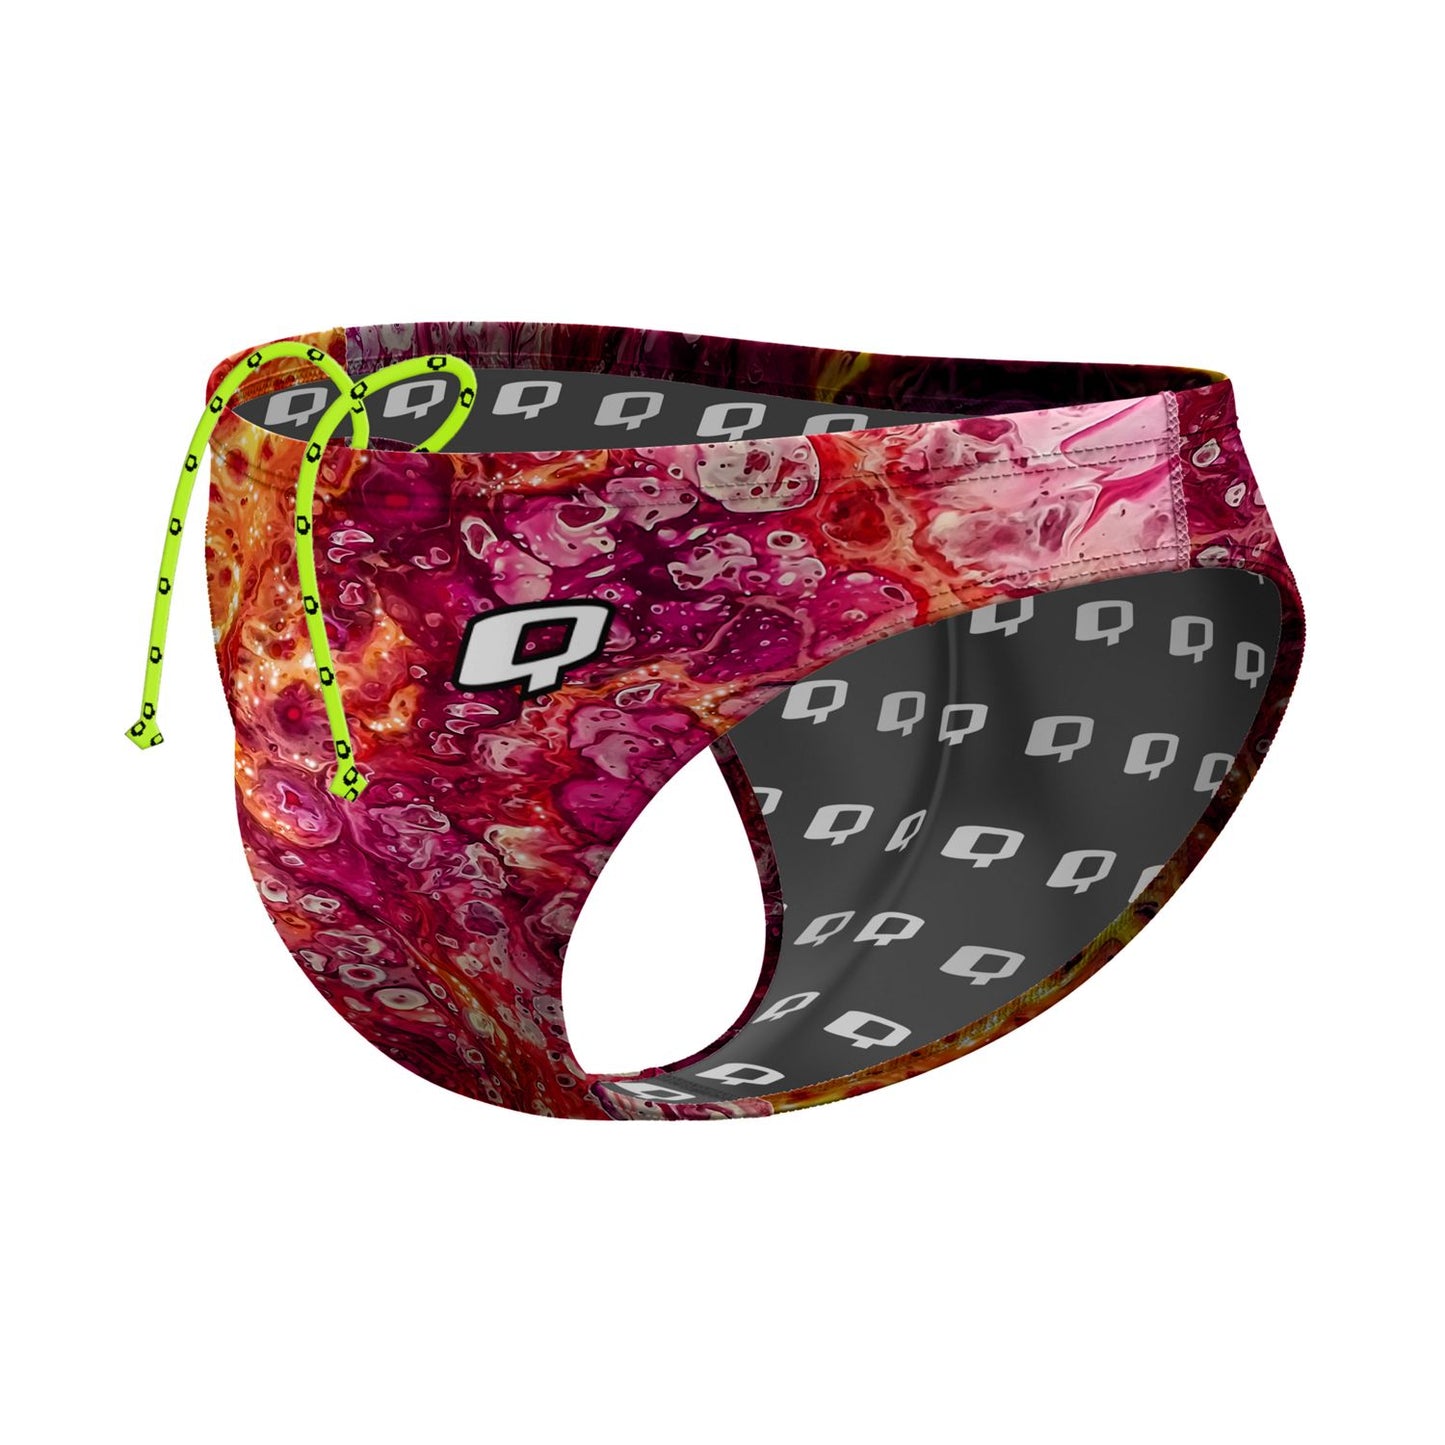 Catching Fire Waterpolo Brief